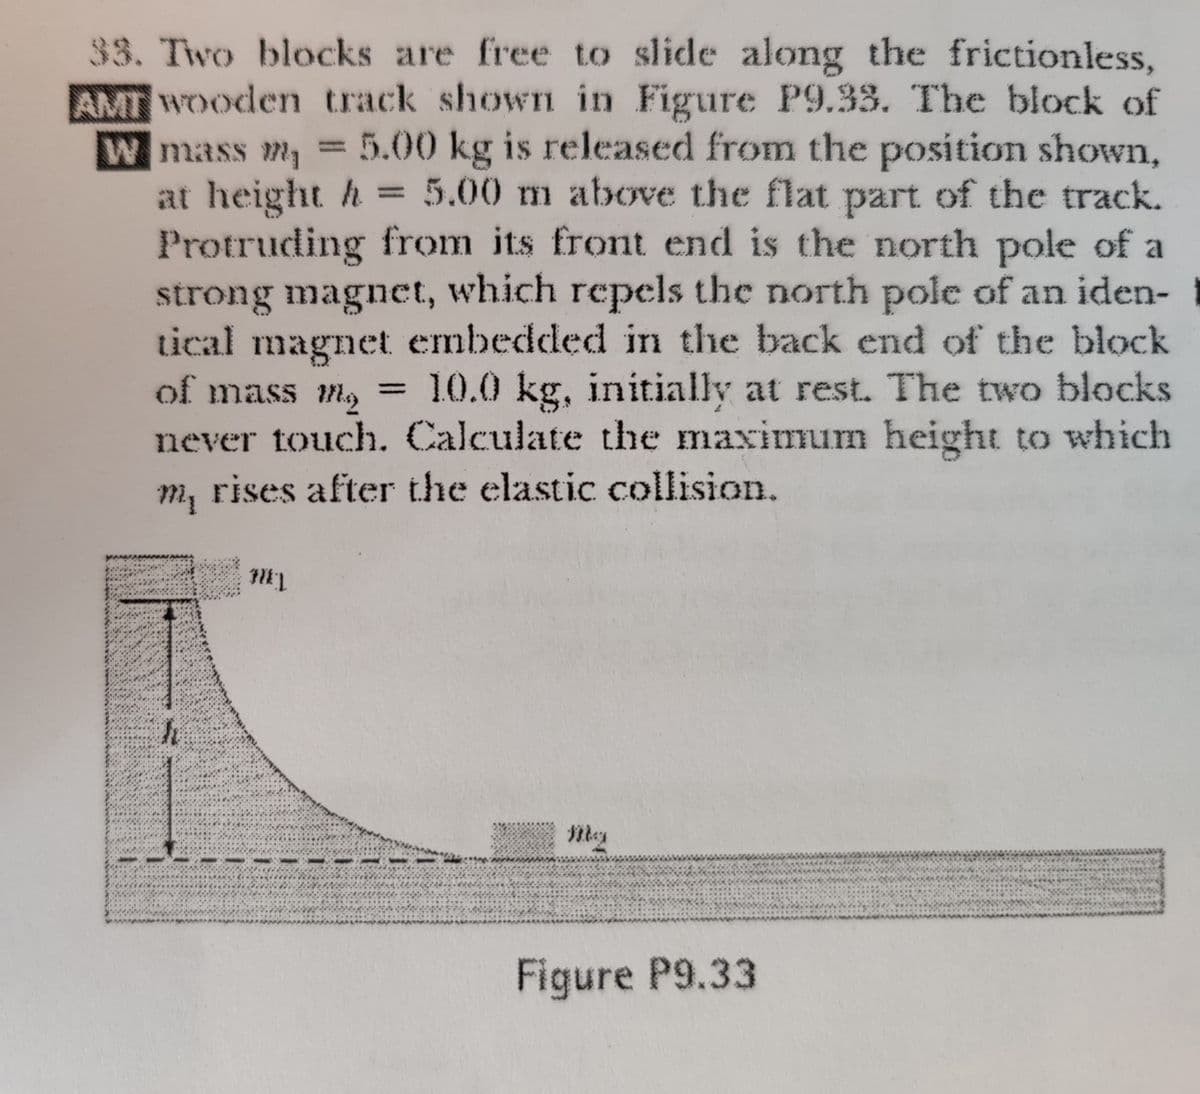 33. Two blocks are free to slide along the frictionless,
AMT Wooden track shown in Figure P9.33. The block of
W mass m, = 5.00 kg is released from the position shown,
at height h = 5.00 m above the flat part of the track.
Protruding from its front end is the north pole of a
strong magnct, which repels the north pole of an iden-
tical magnet embedded in the back end of the block
of mass l,
10.0 kg, initially at rest. The two blocks
%3D
never touch. Calculate the maximum height to which
m, rises after the elastic collision.
Figure P9.33
